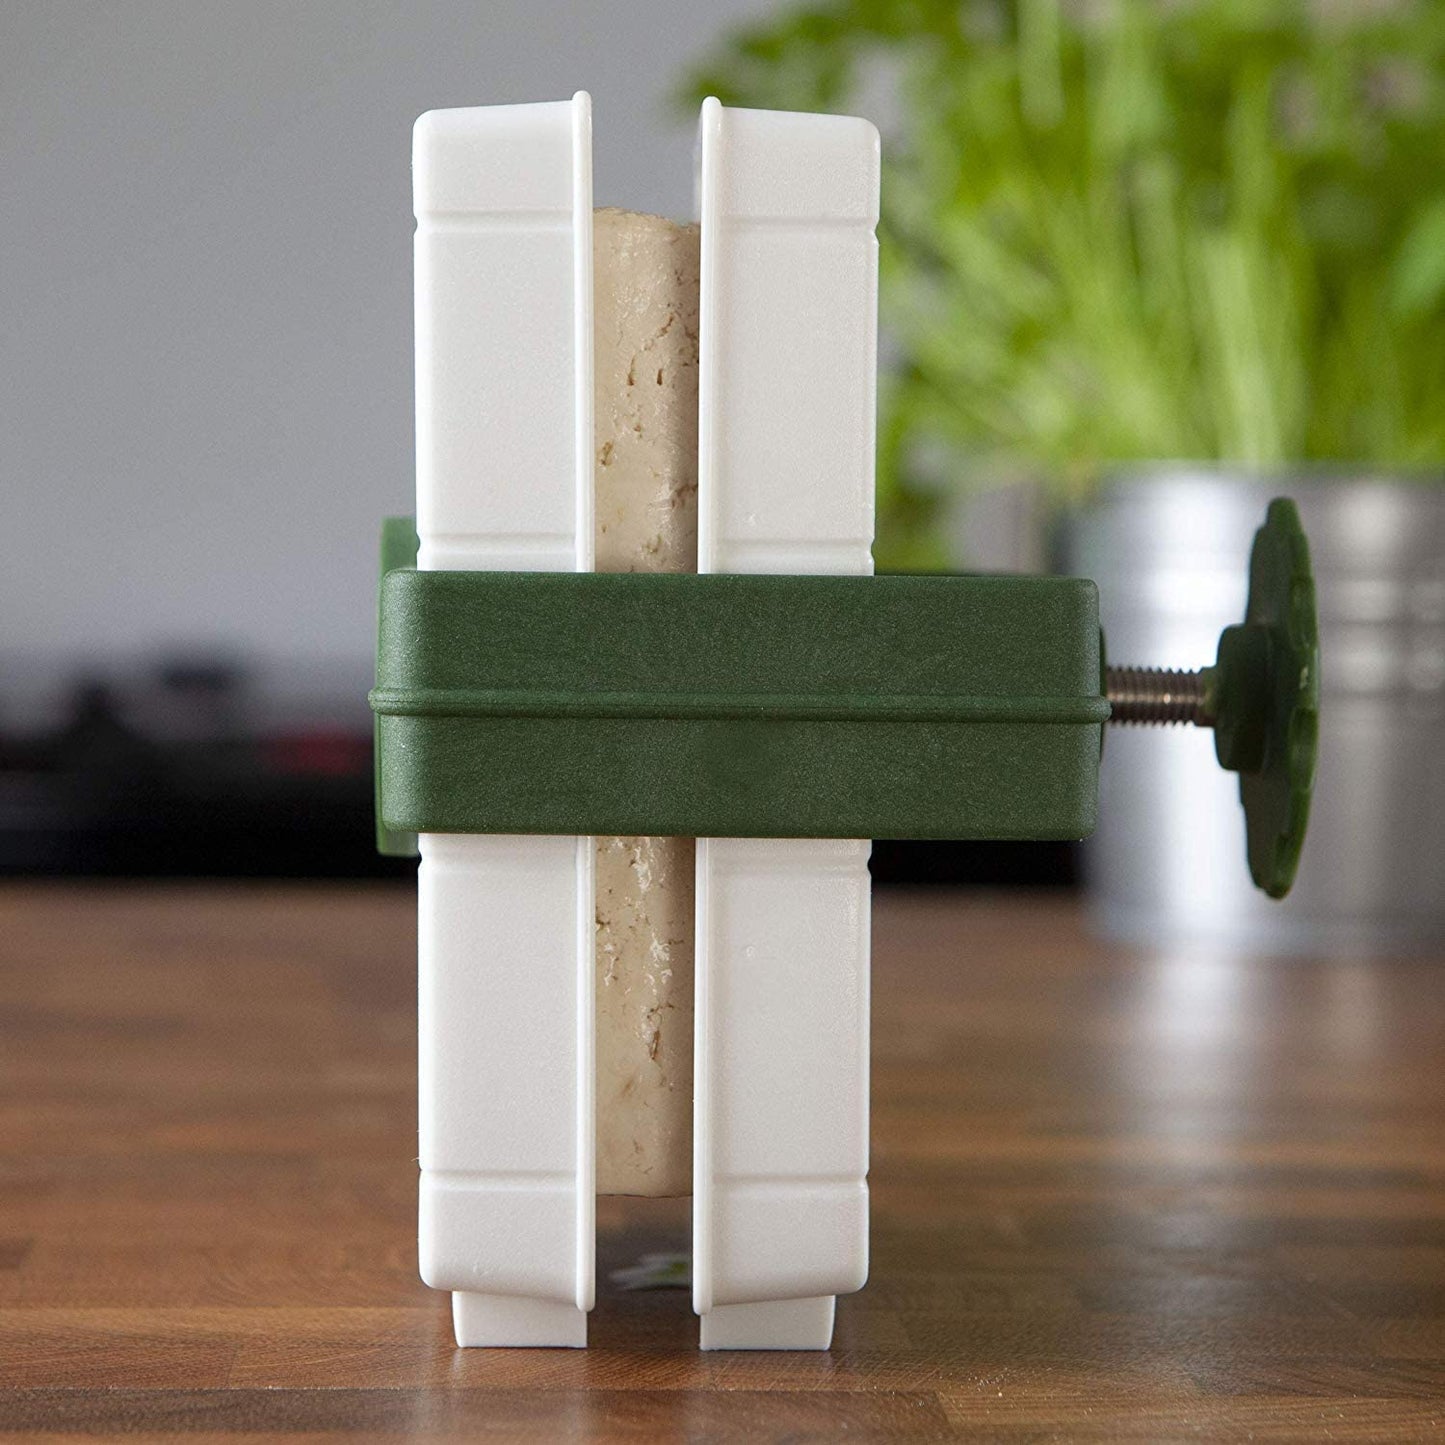 - Tofu Press - Get More Out of Your Tofu with the Most Efficient Tofu Press